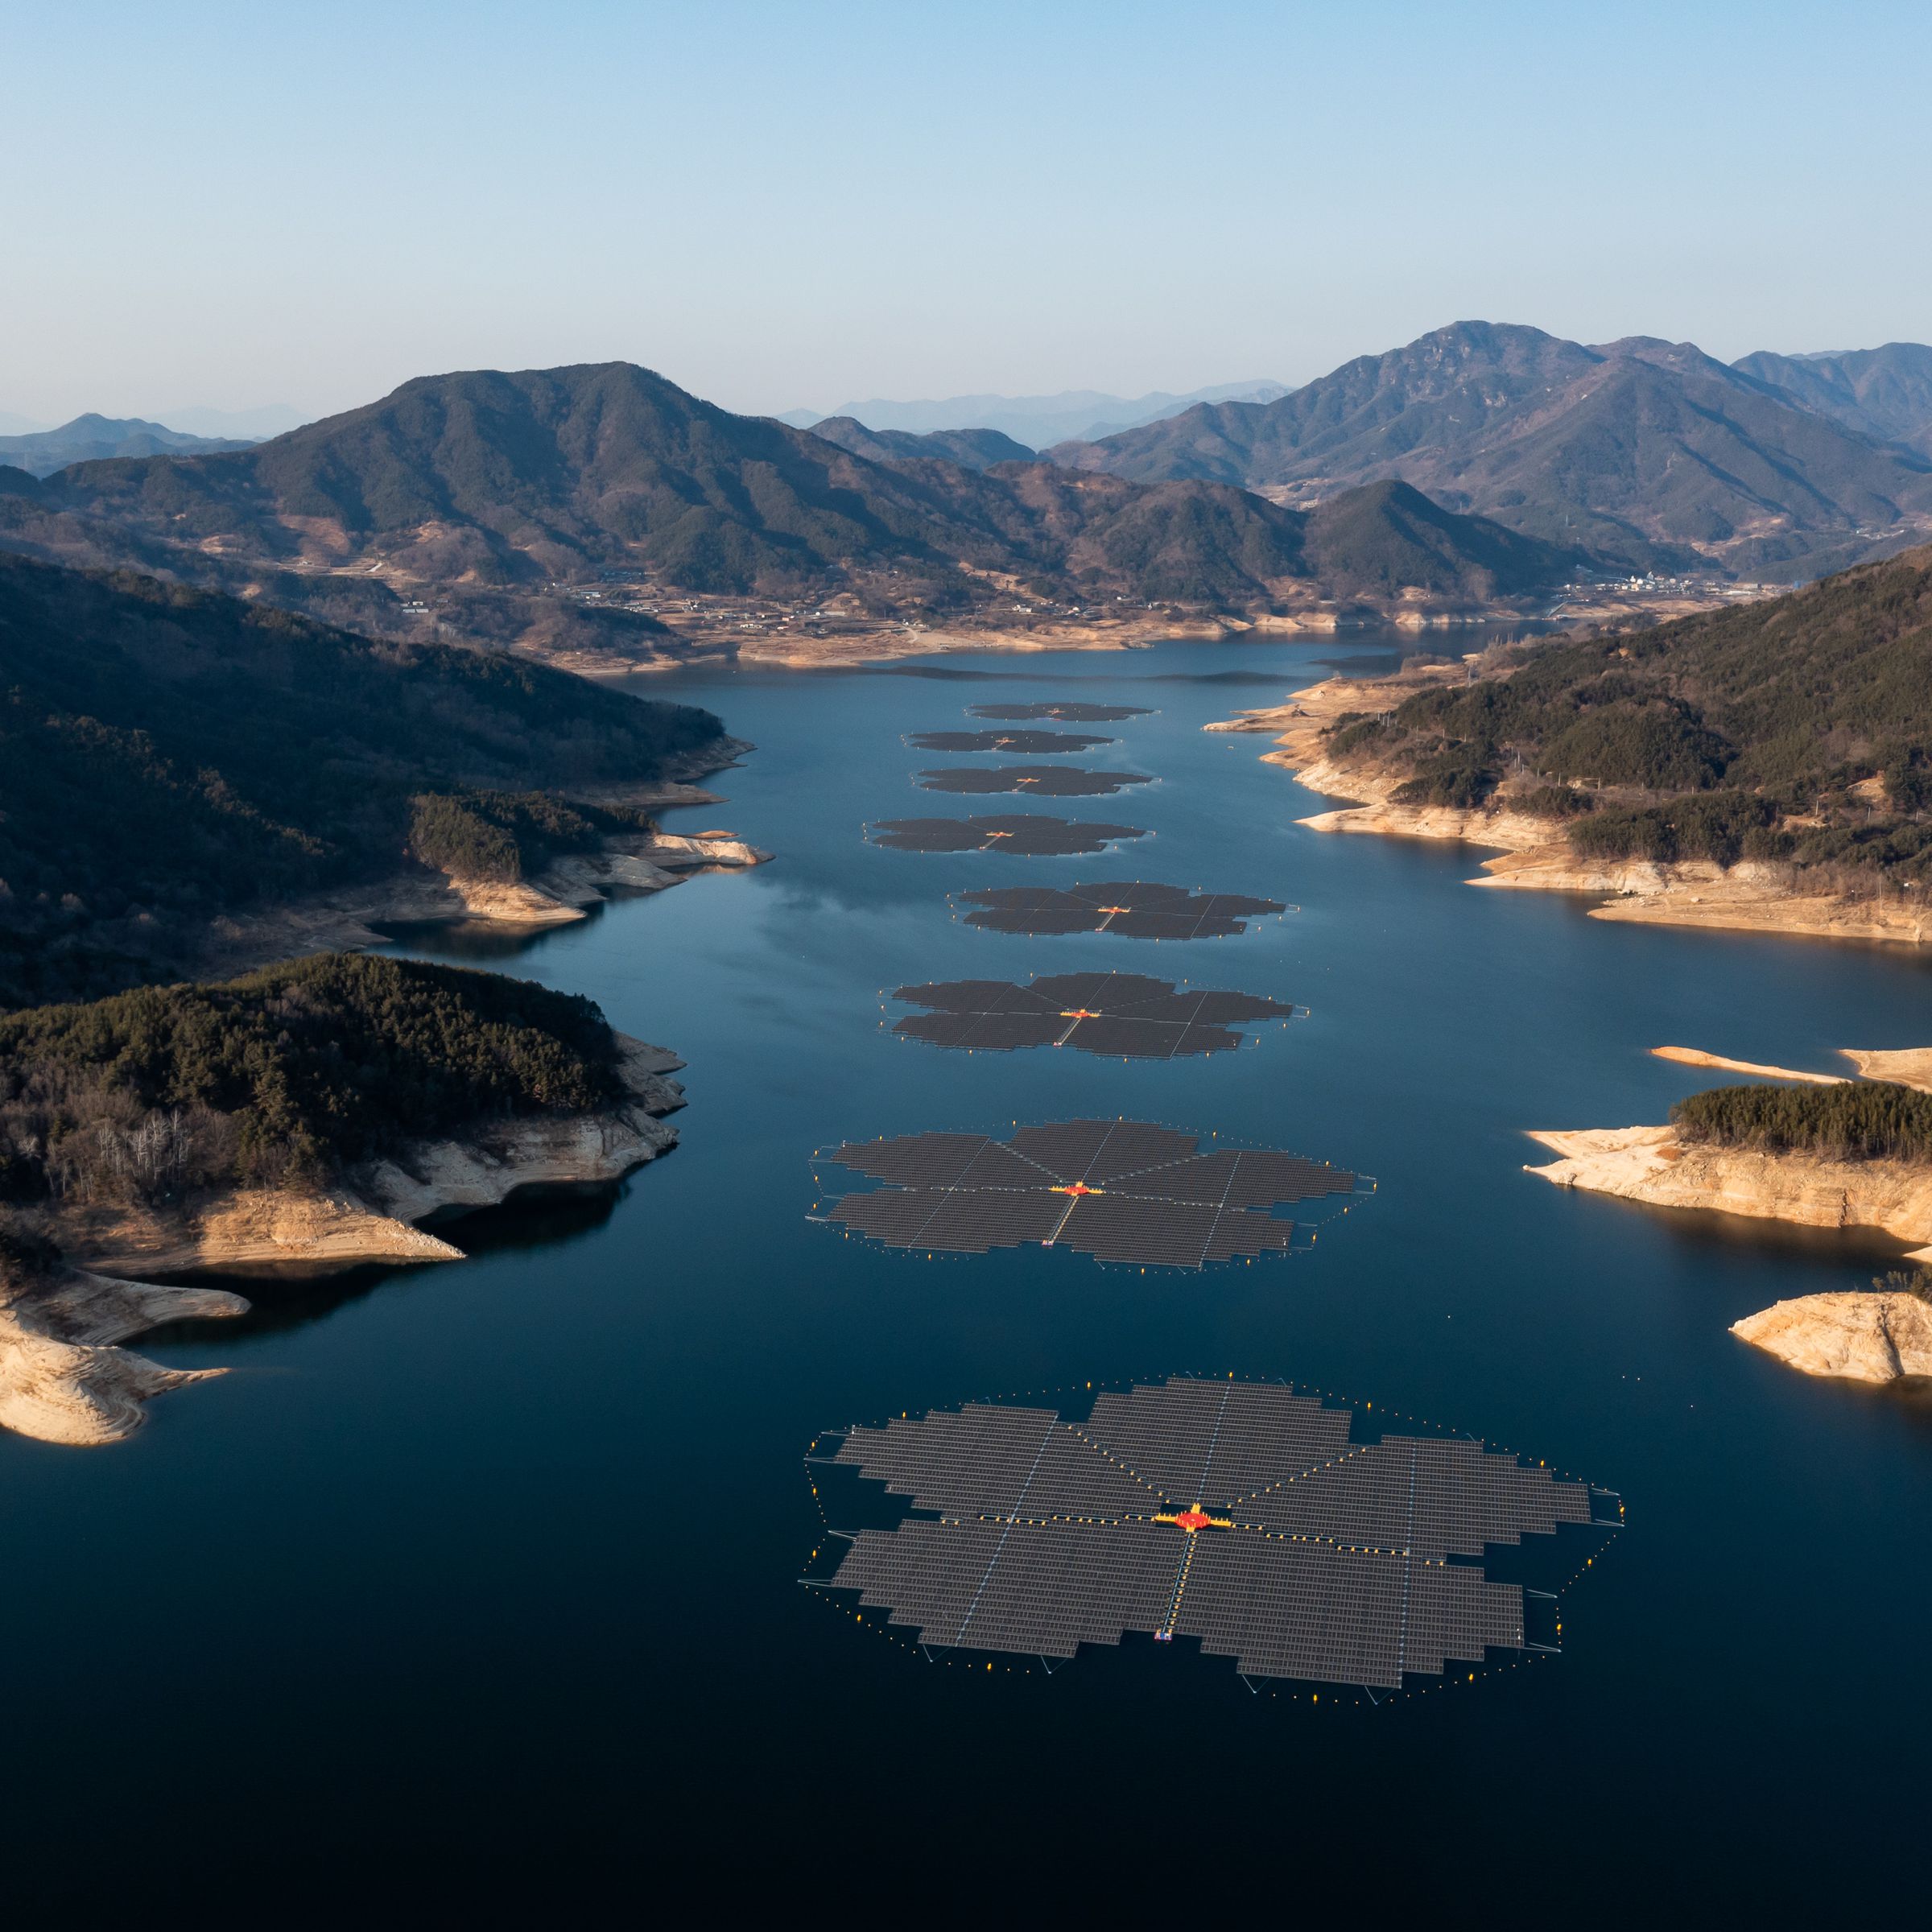 Multiple solar arrays in the shape of flowers are lined up on top of a lake between hills and mountains.